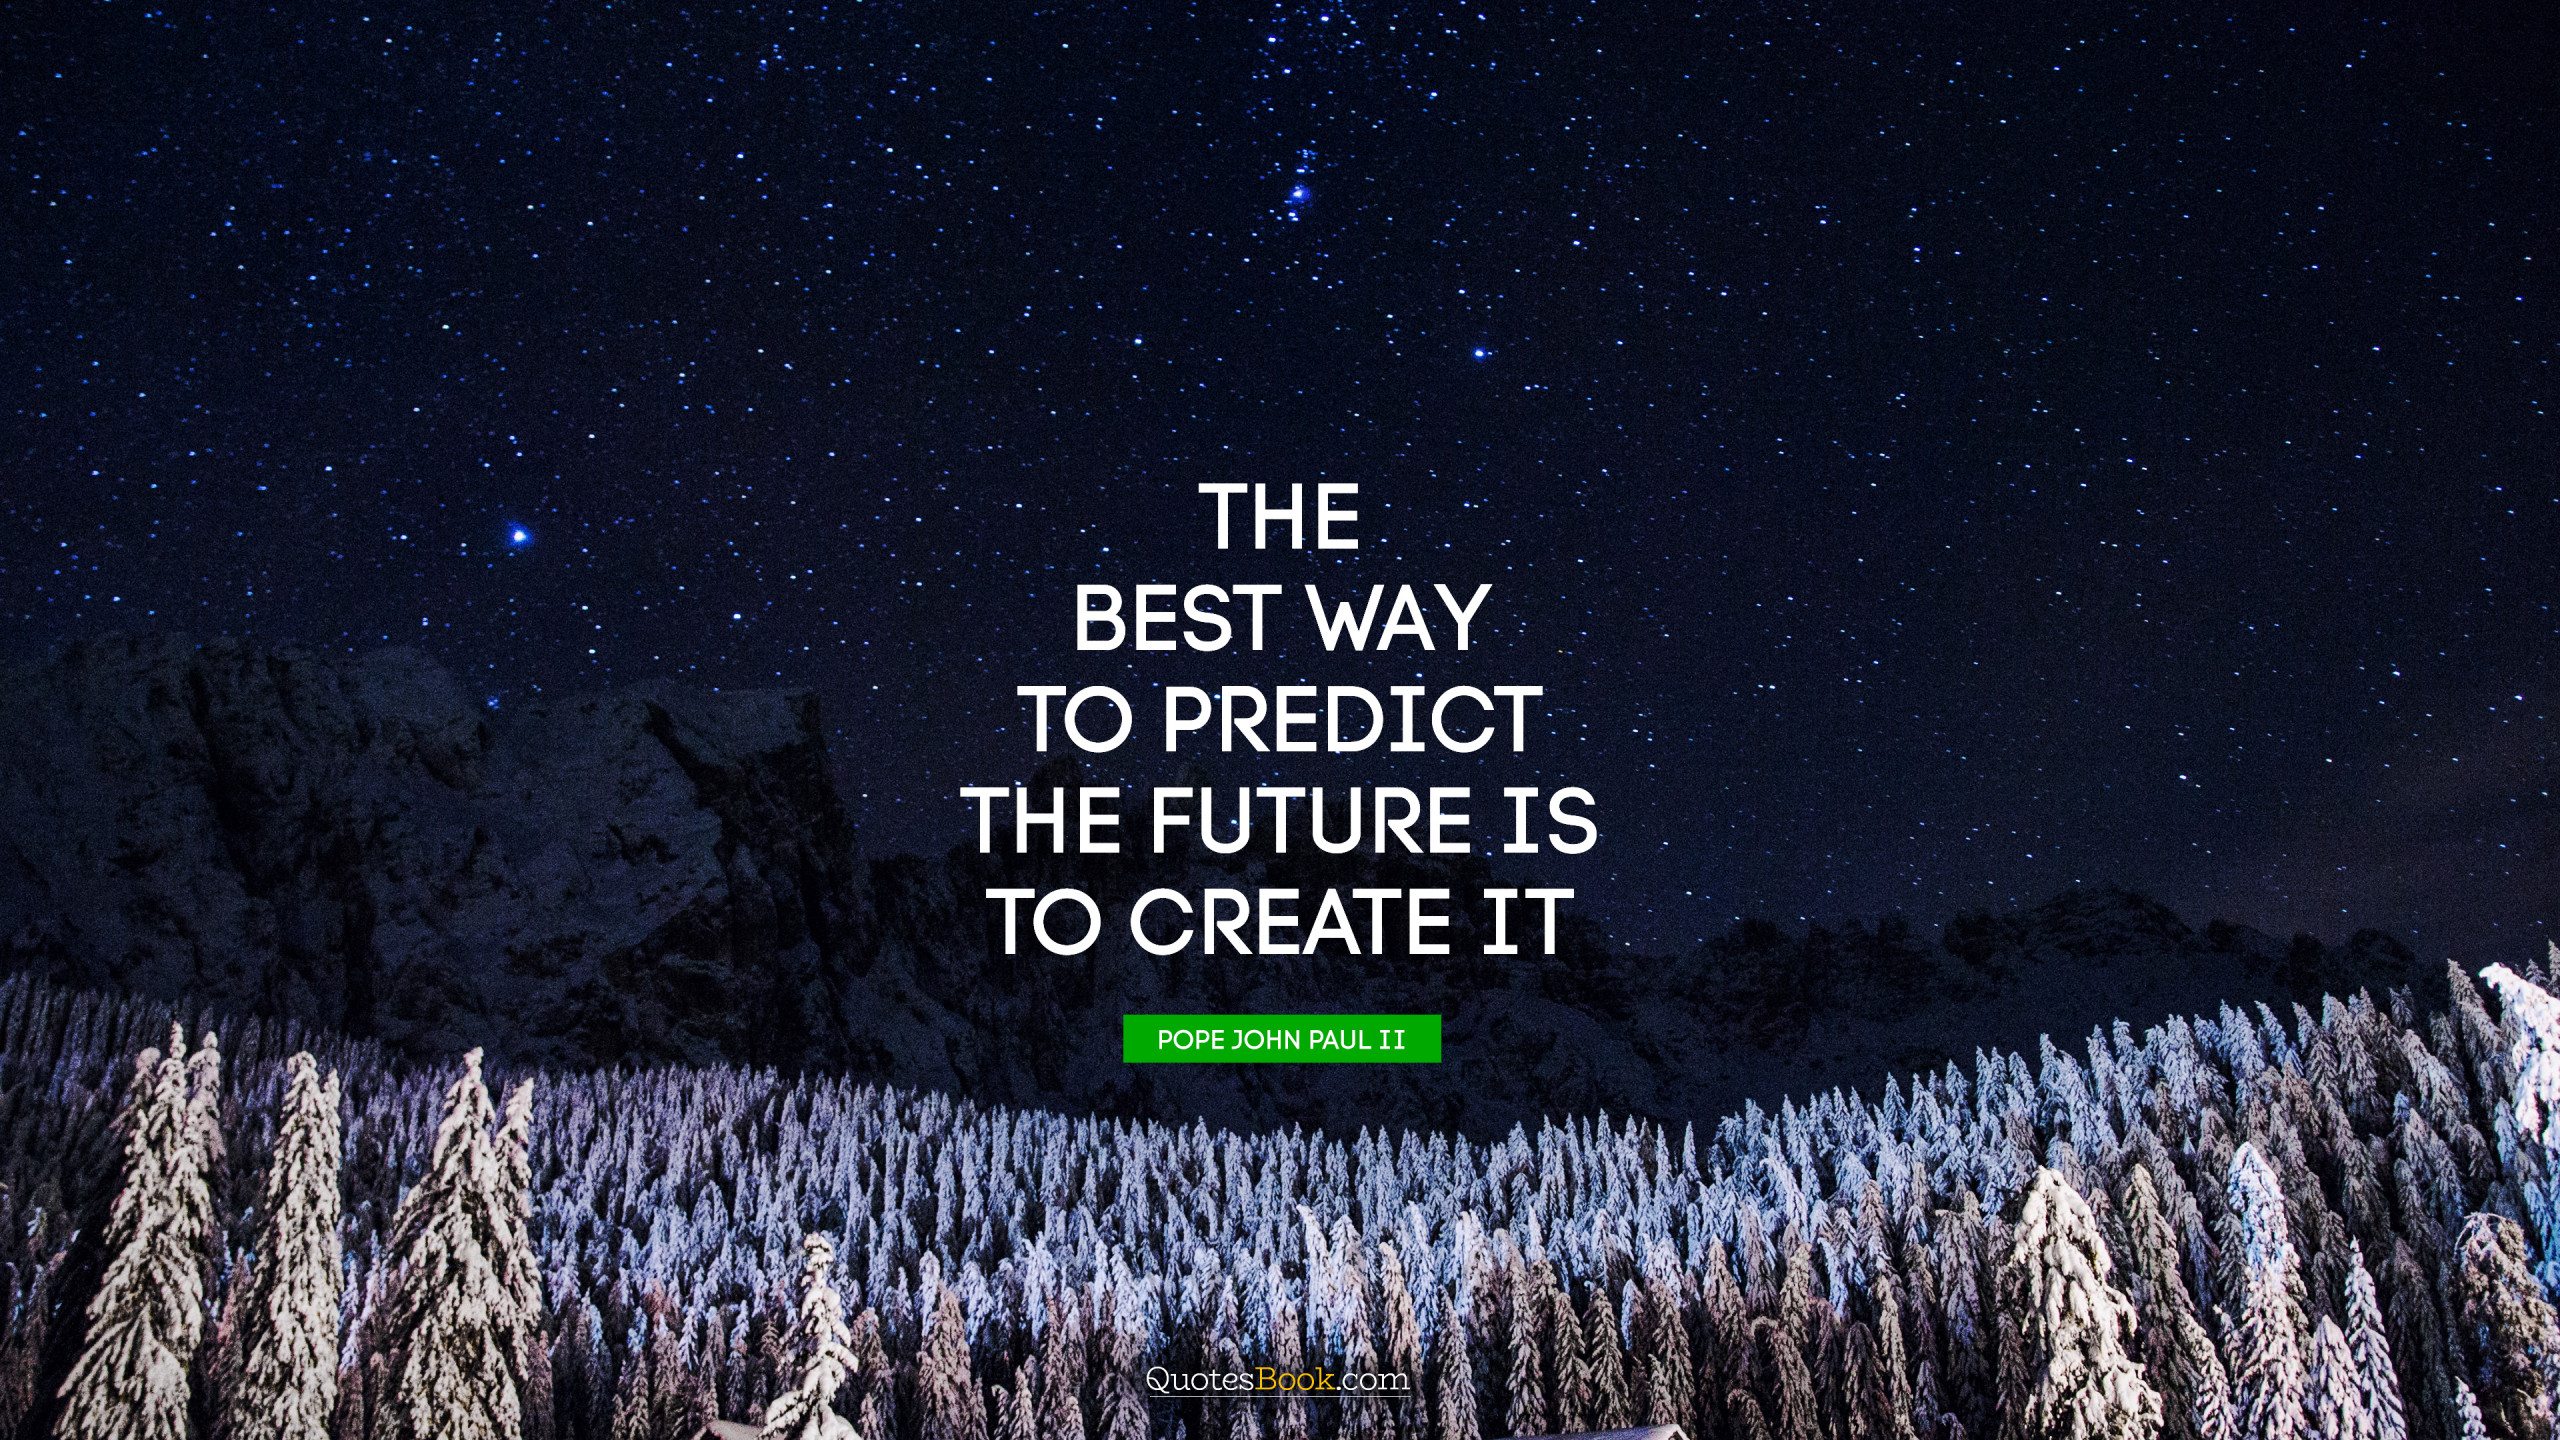 The best way to predict the future is to create it. - Quote by Peter